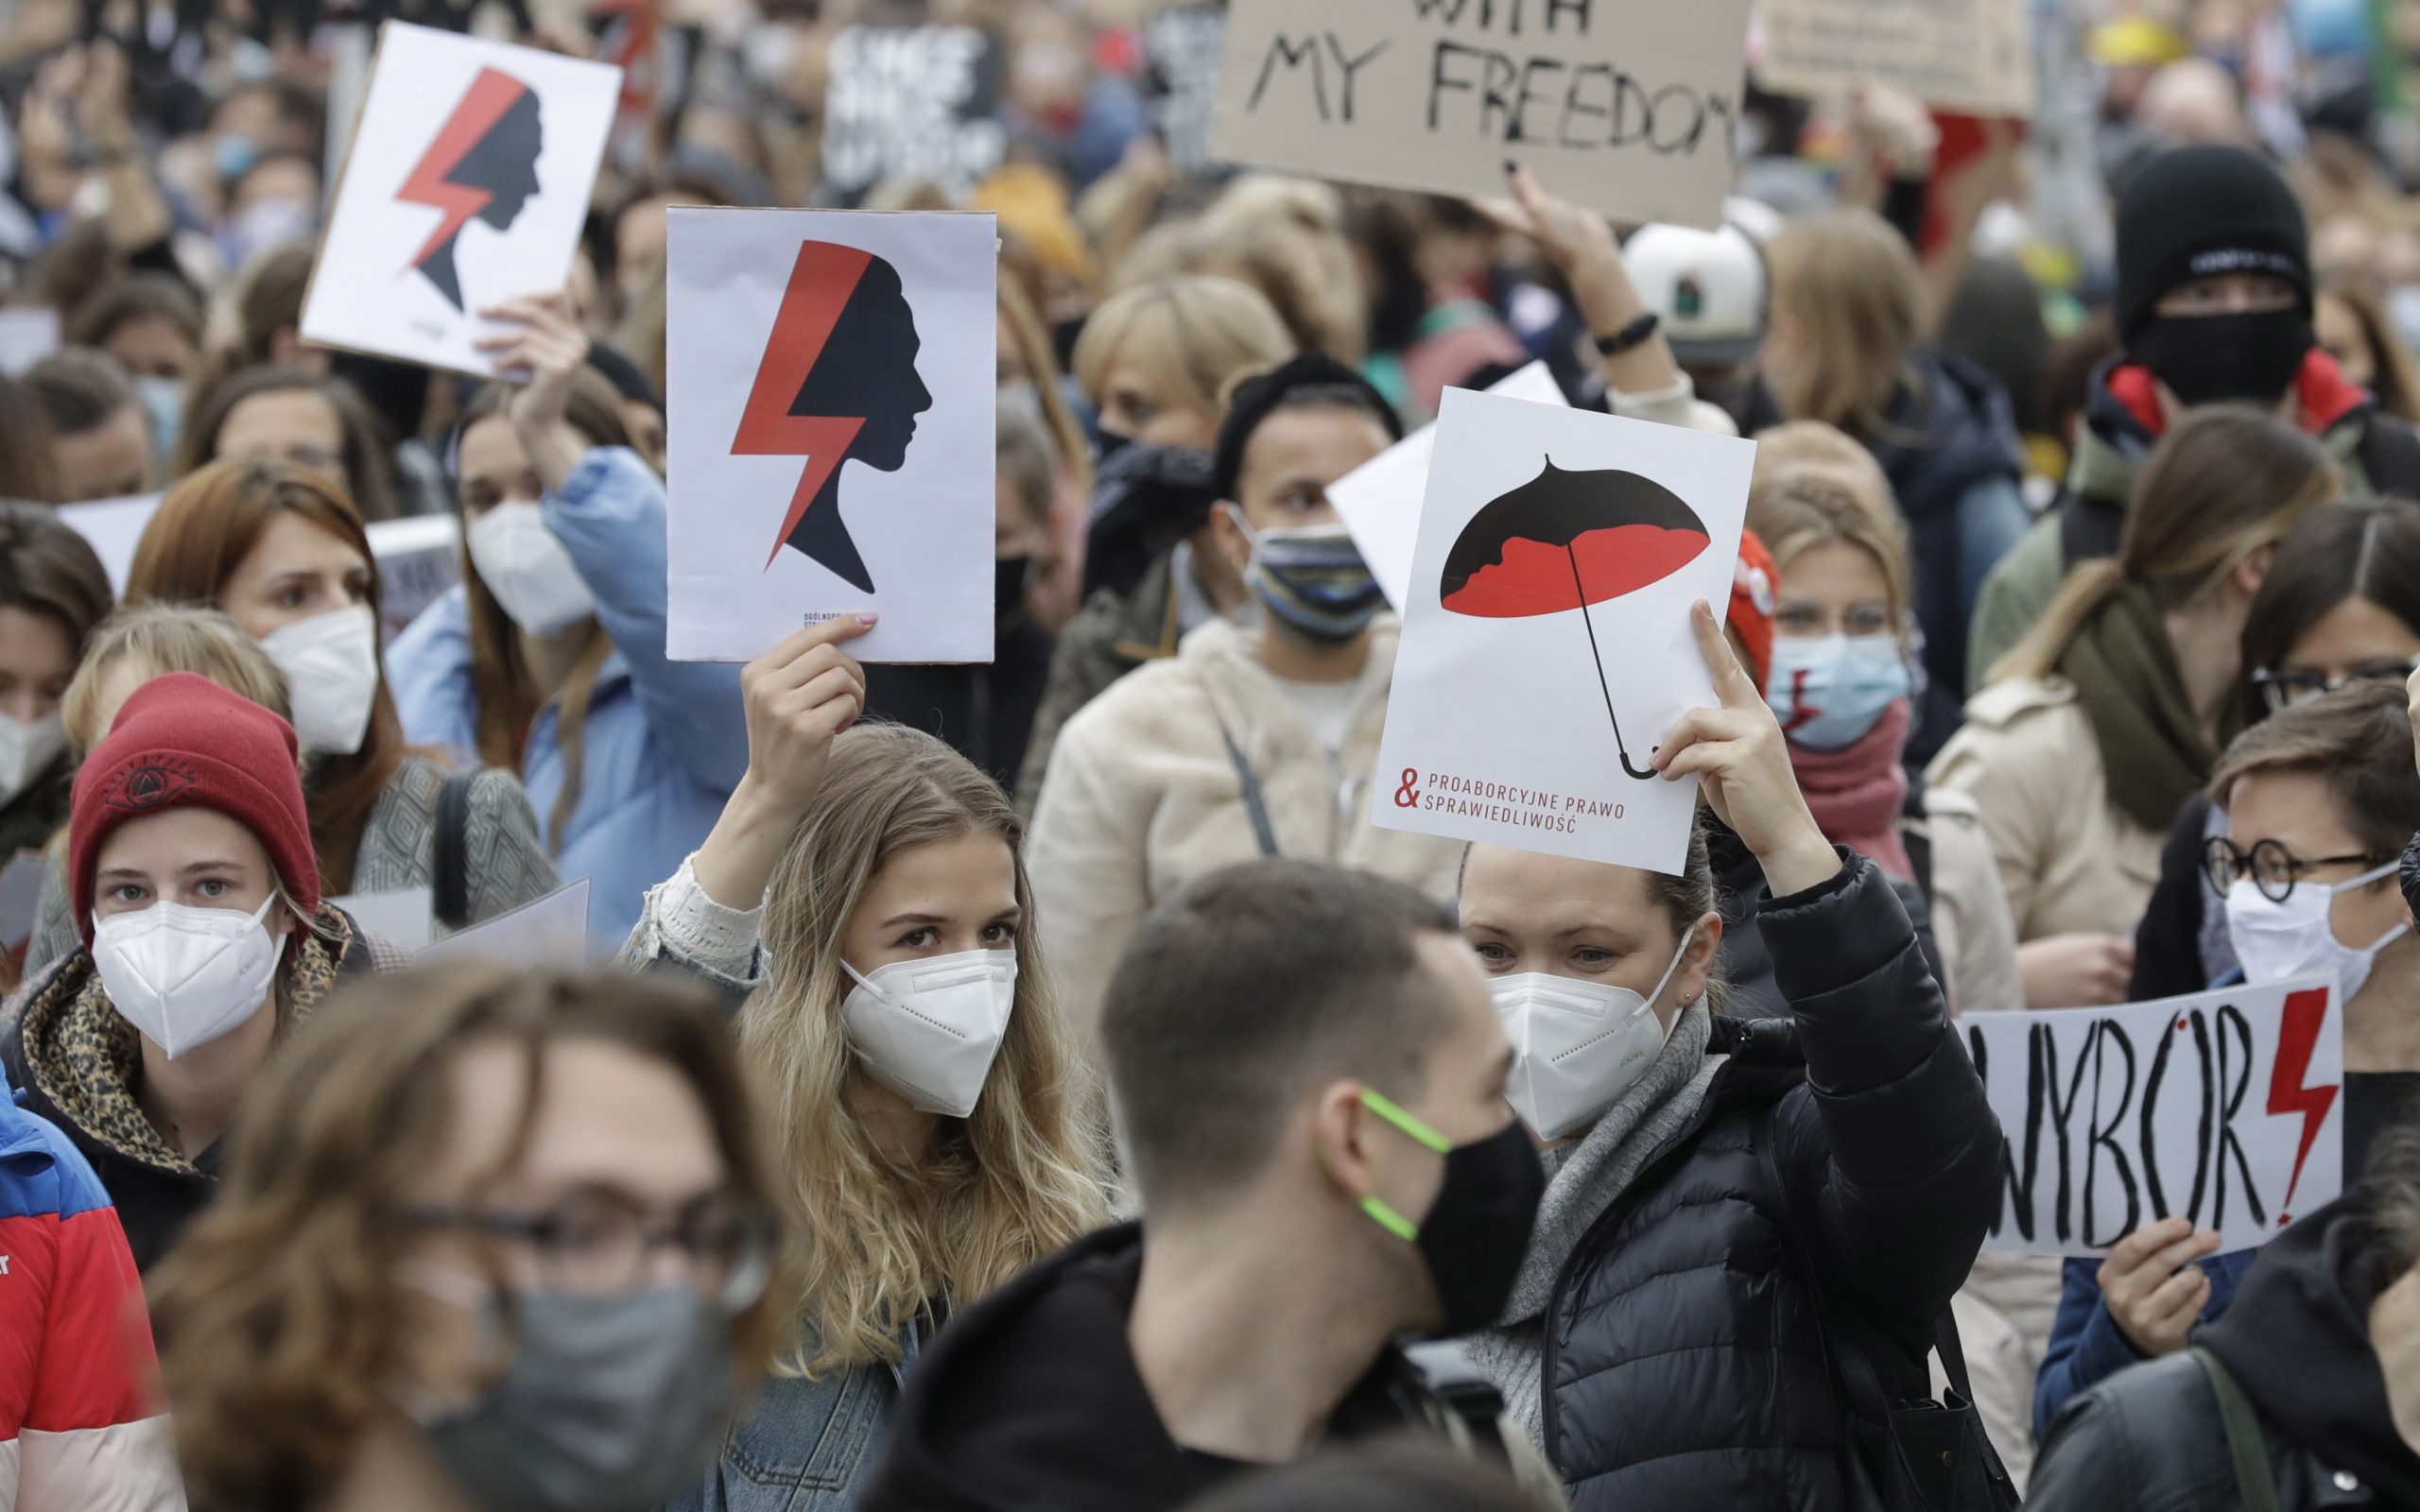 Hungarian Press Roundup: Reactions to Conflicts over Abortion Rights in Poland